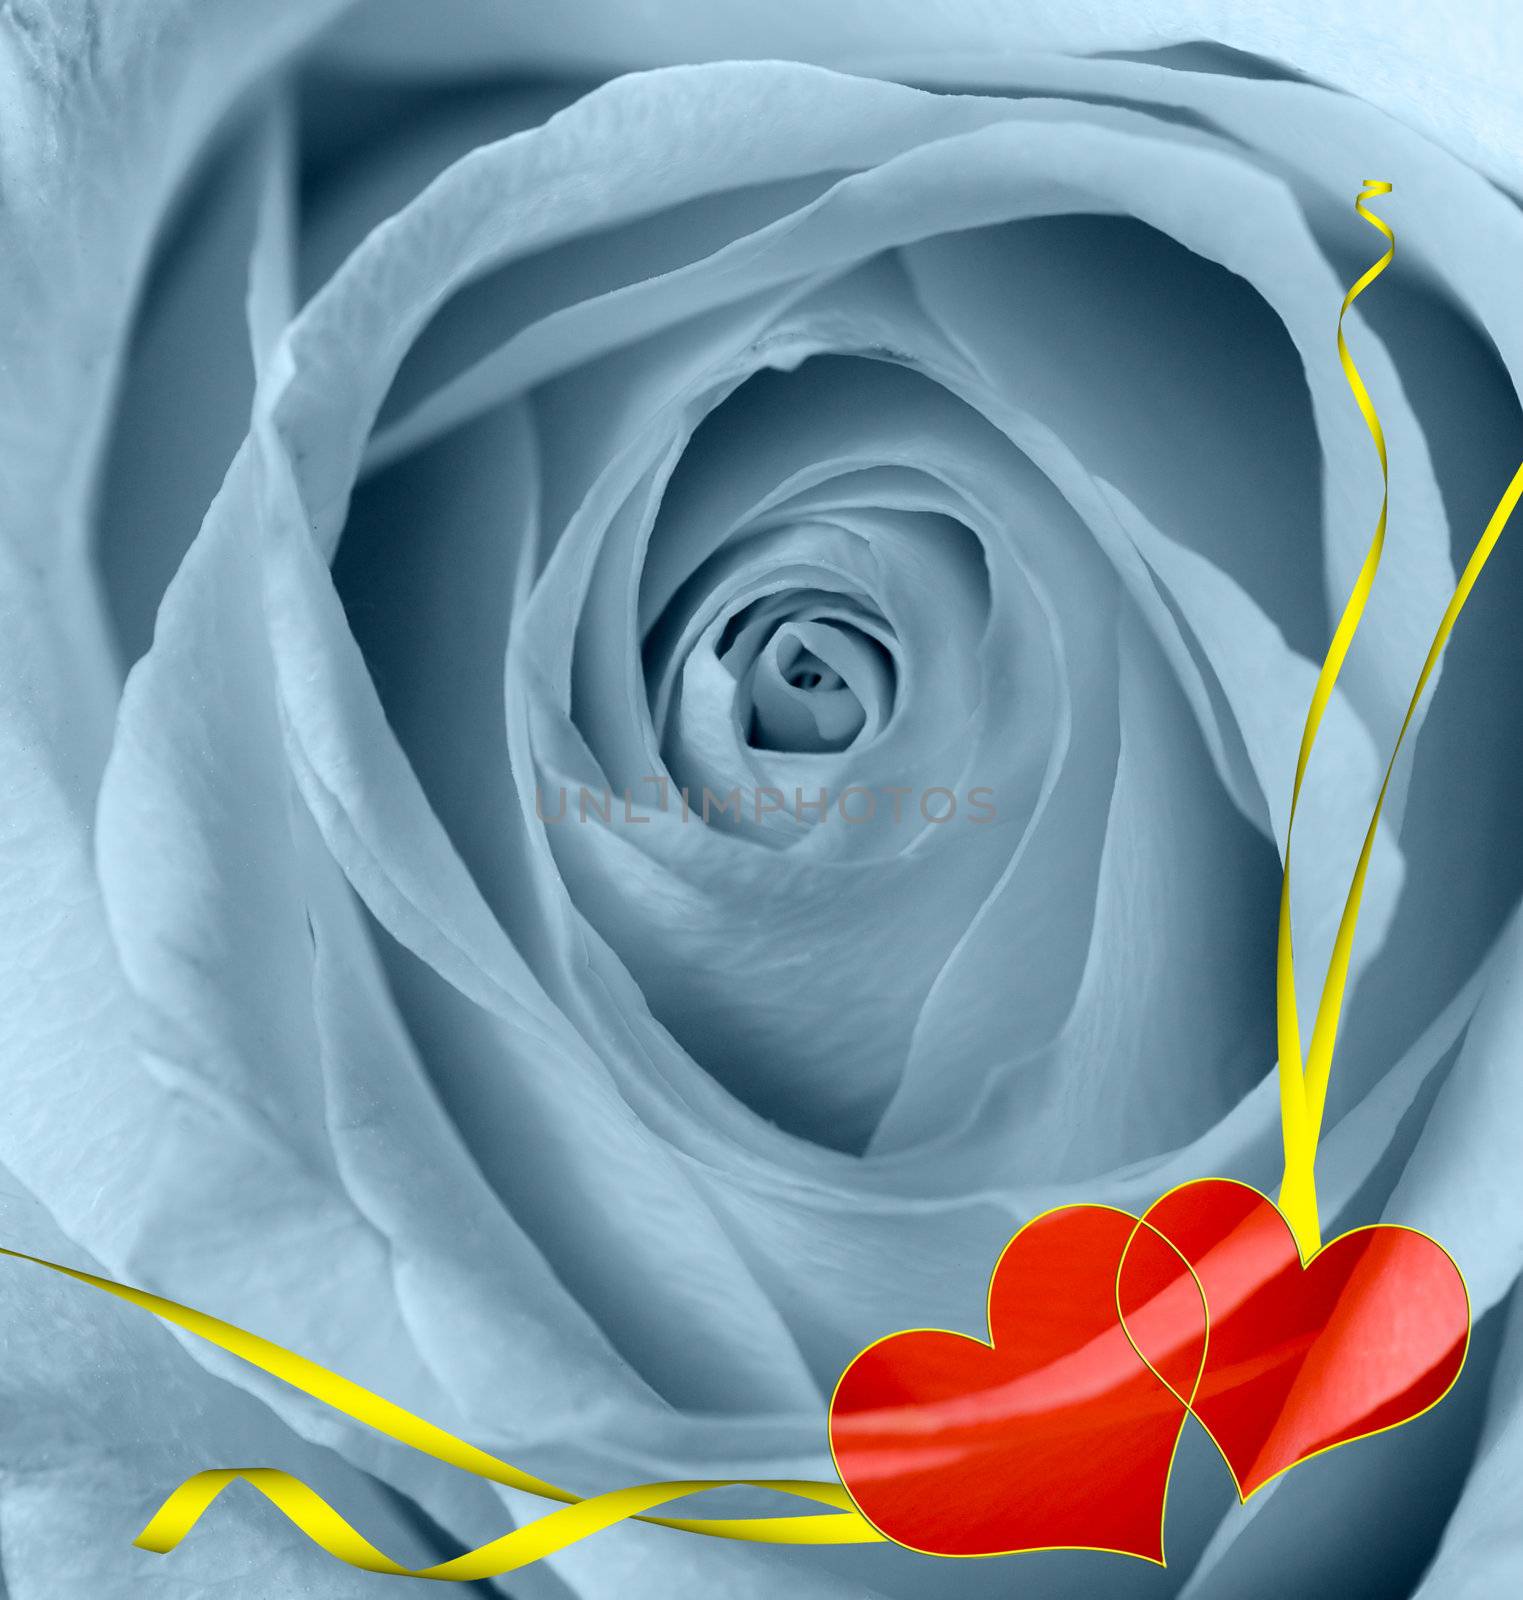 cold rose. With two hearts and yellow tapes. A congratulatory card